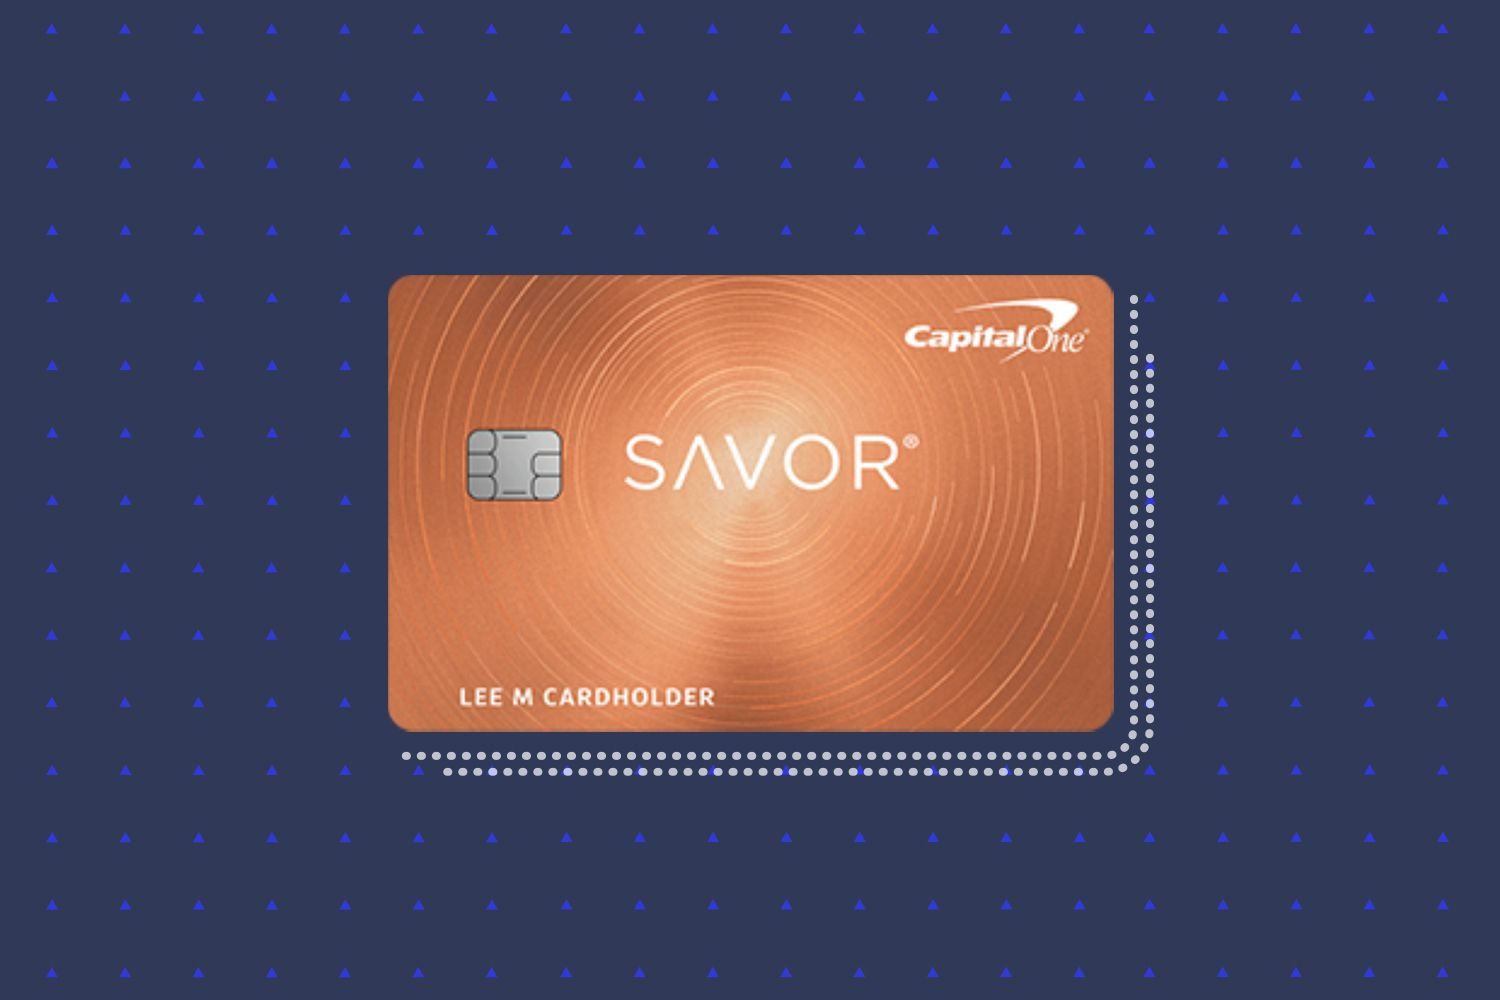 Learn how to apply for the Savor Cash Rewards